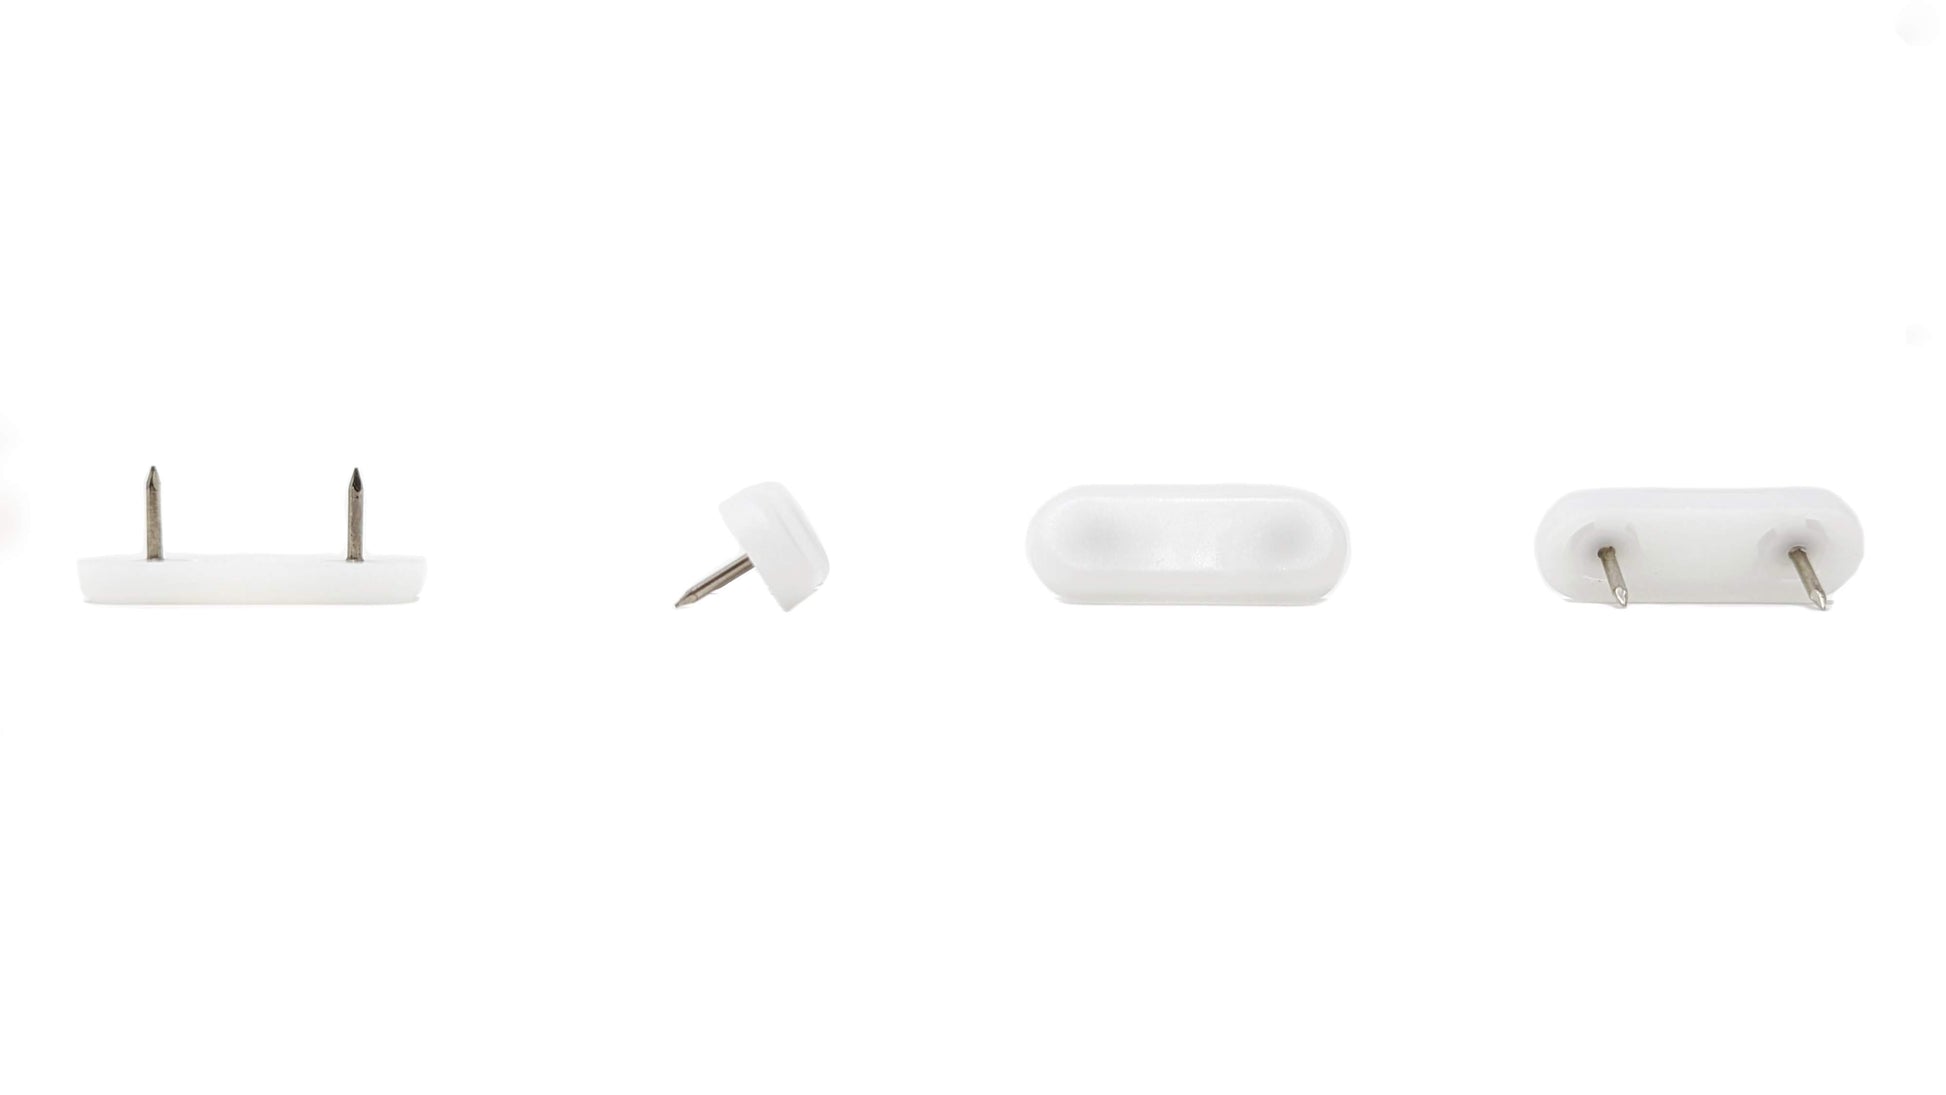 44x16mm Nail in Plastic Furniture Glides Available in Brown, White & Black | Made in Germany | Keay Vital Parts - Keay Vital Parts